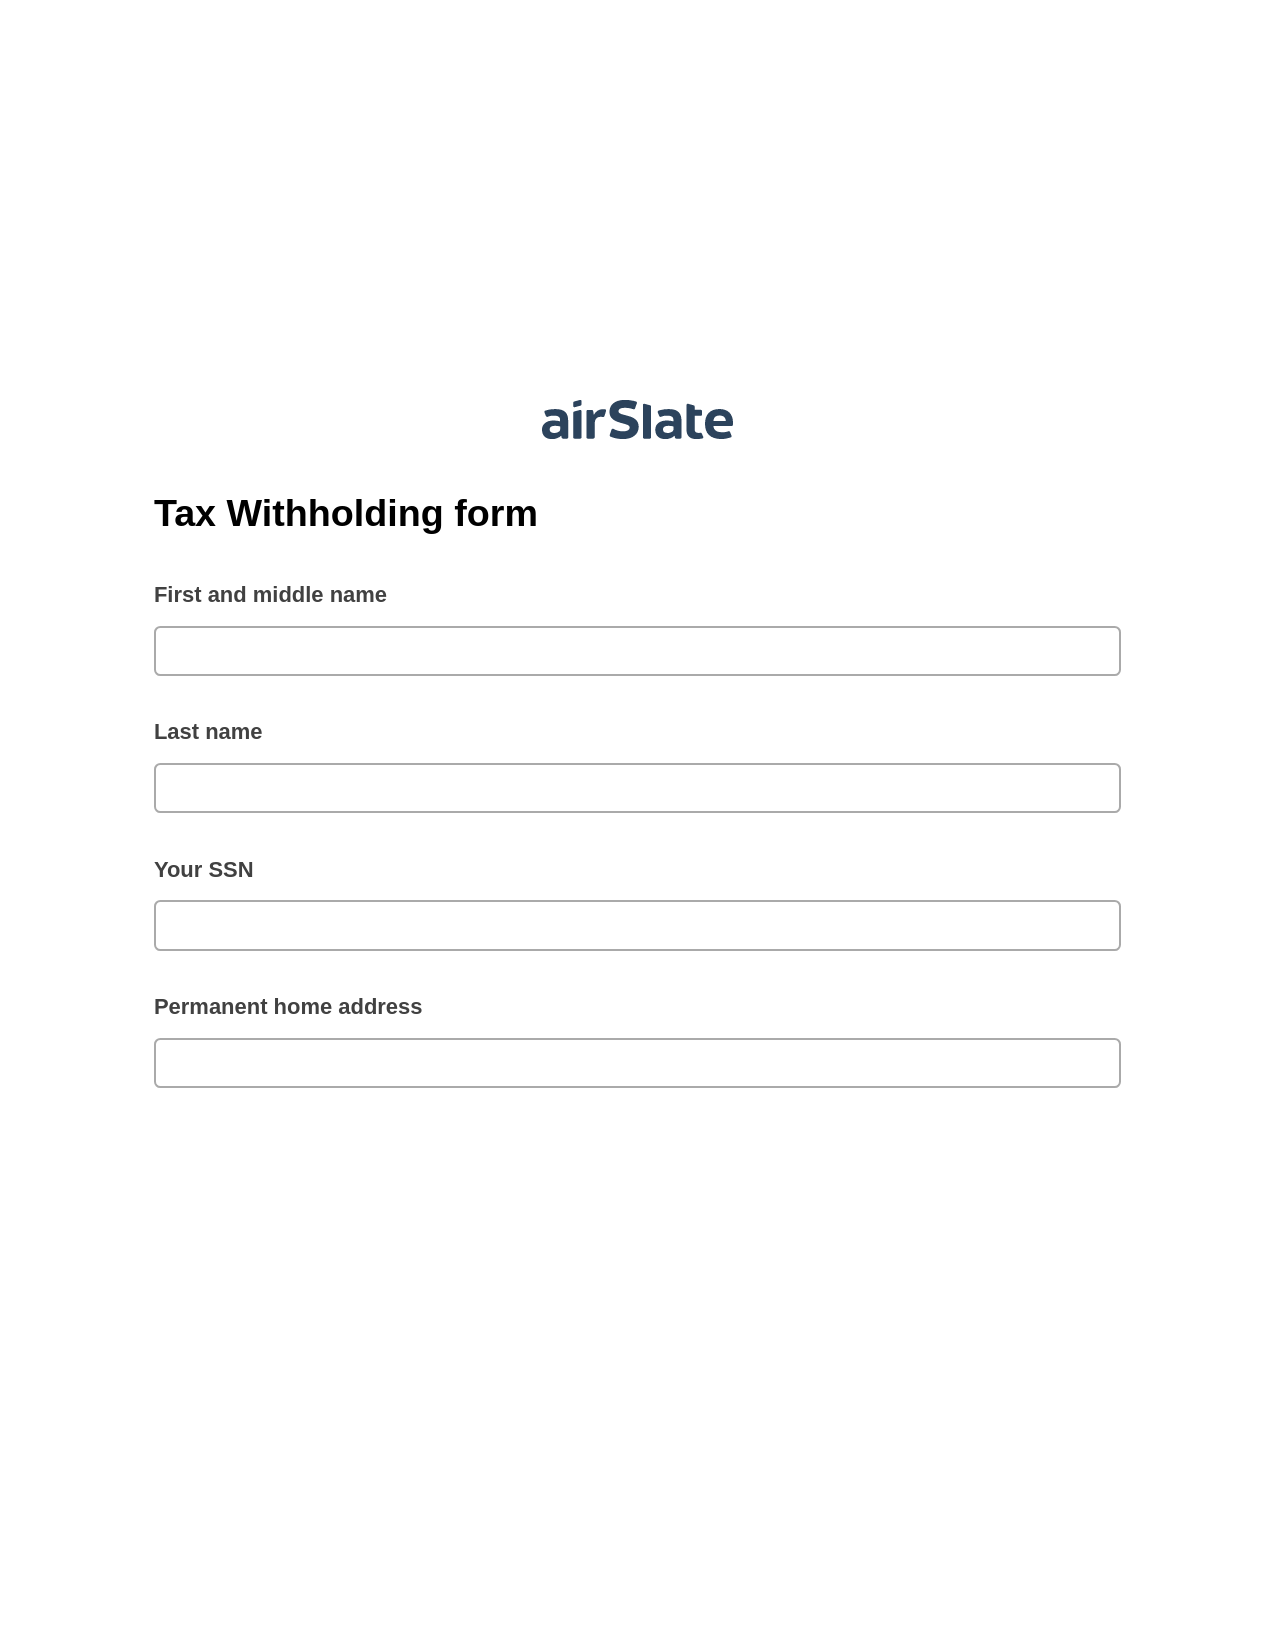 Tax Withholding form Pre-fill Document Bot, Roles Reminder Bot, Export to Google Sheet Bot